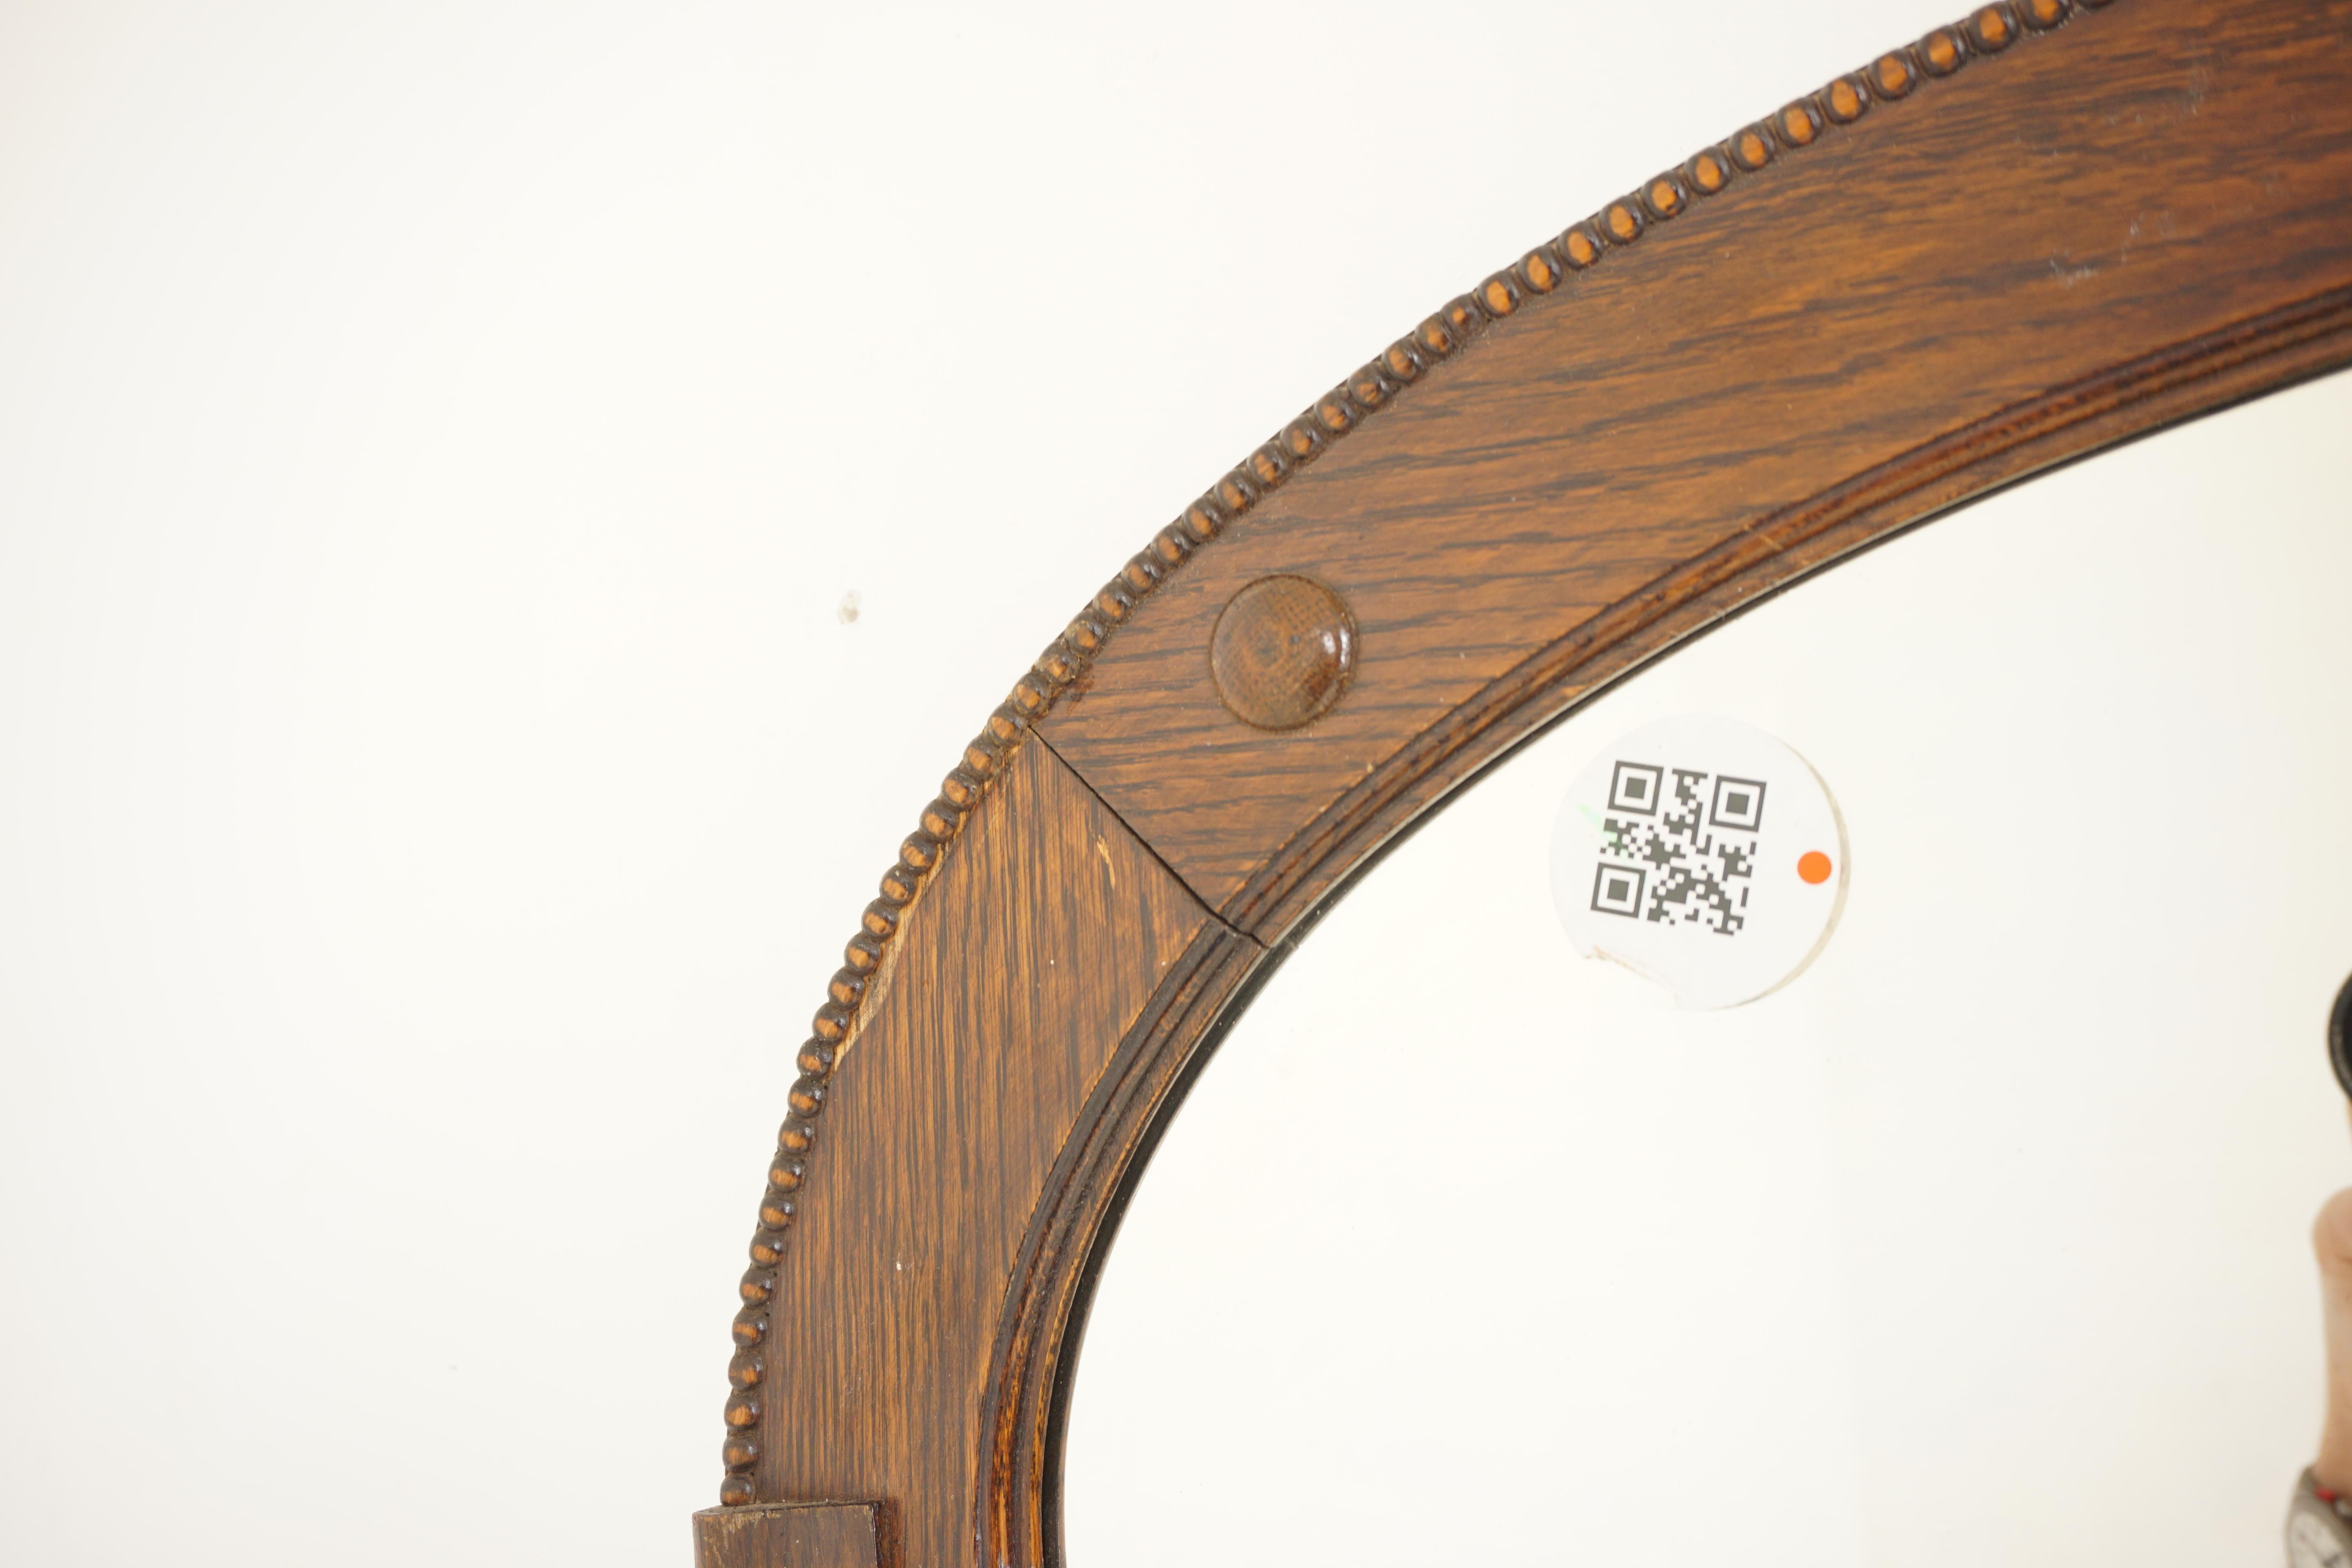 Ant. Oak Oval Bevelled Wall Mirror, Scotland 1900, H812

Scotland 1900
Solid Oak 
Original Finish 
Oak framed oval bevelled mirror with bobbin beading around the perimeter (some loss)
With from rondels on frame
Could be used vertically on